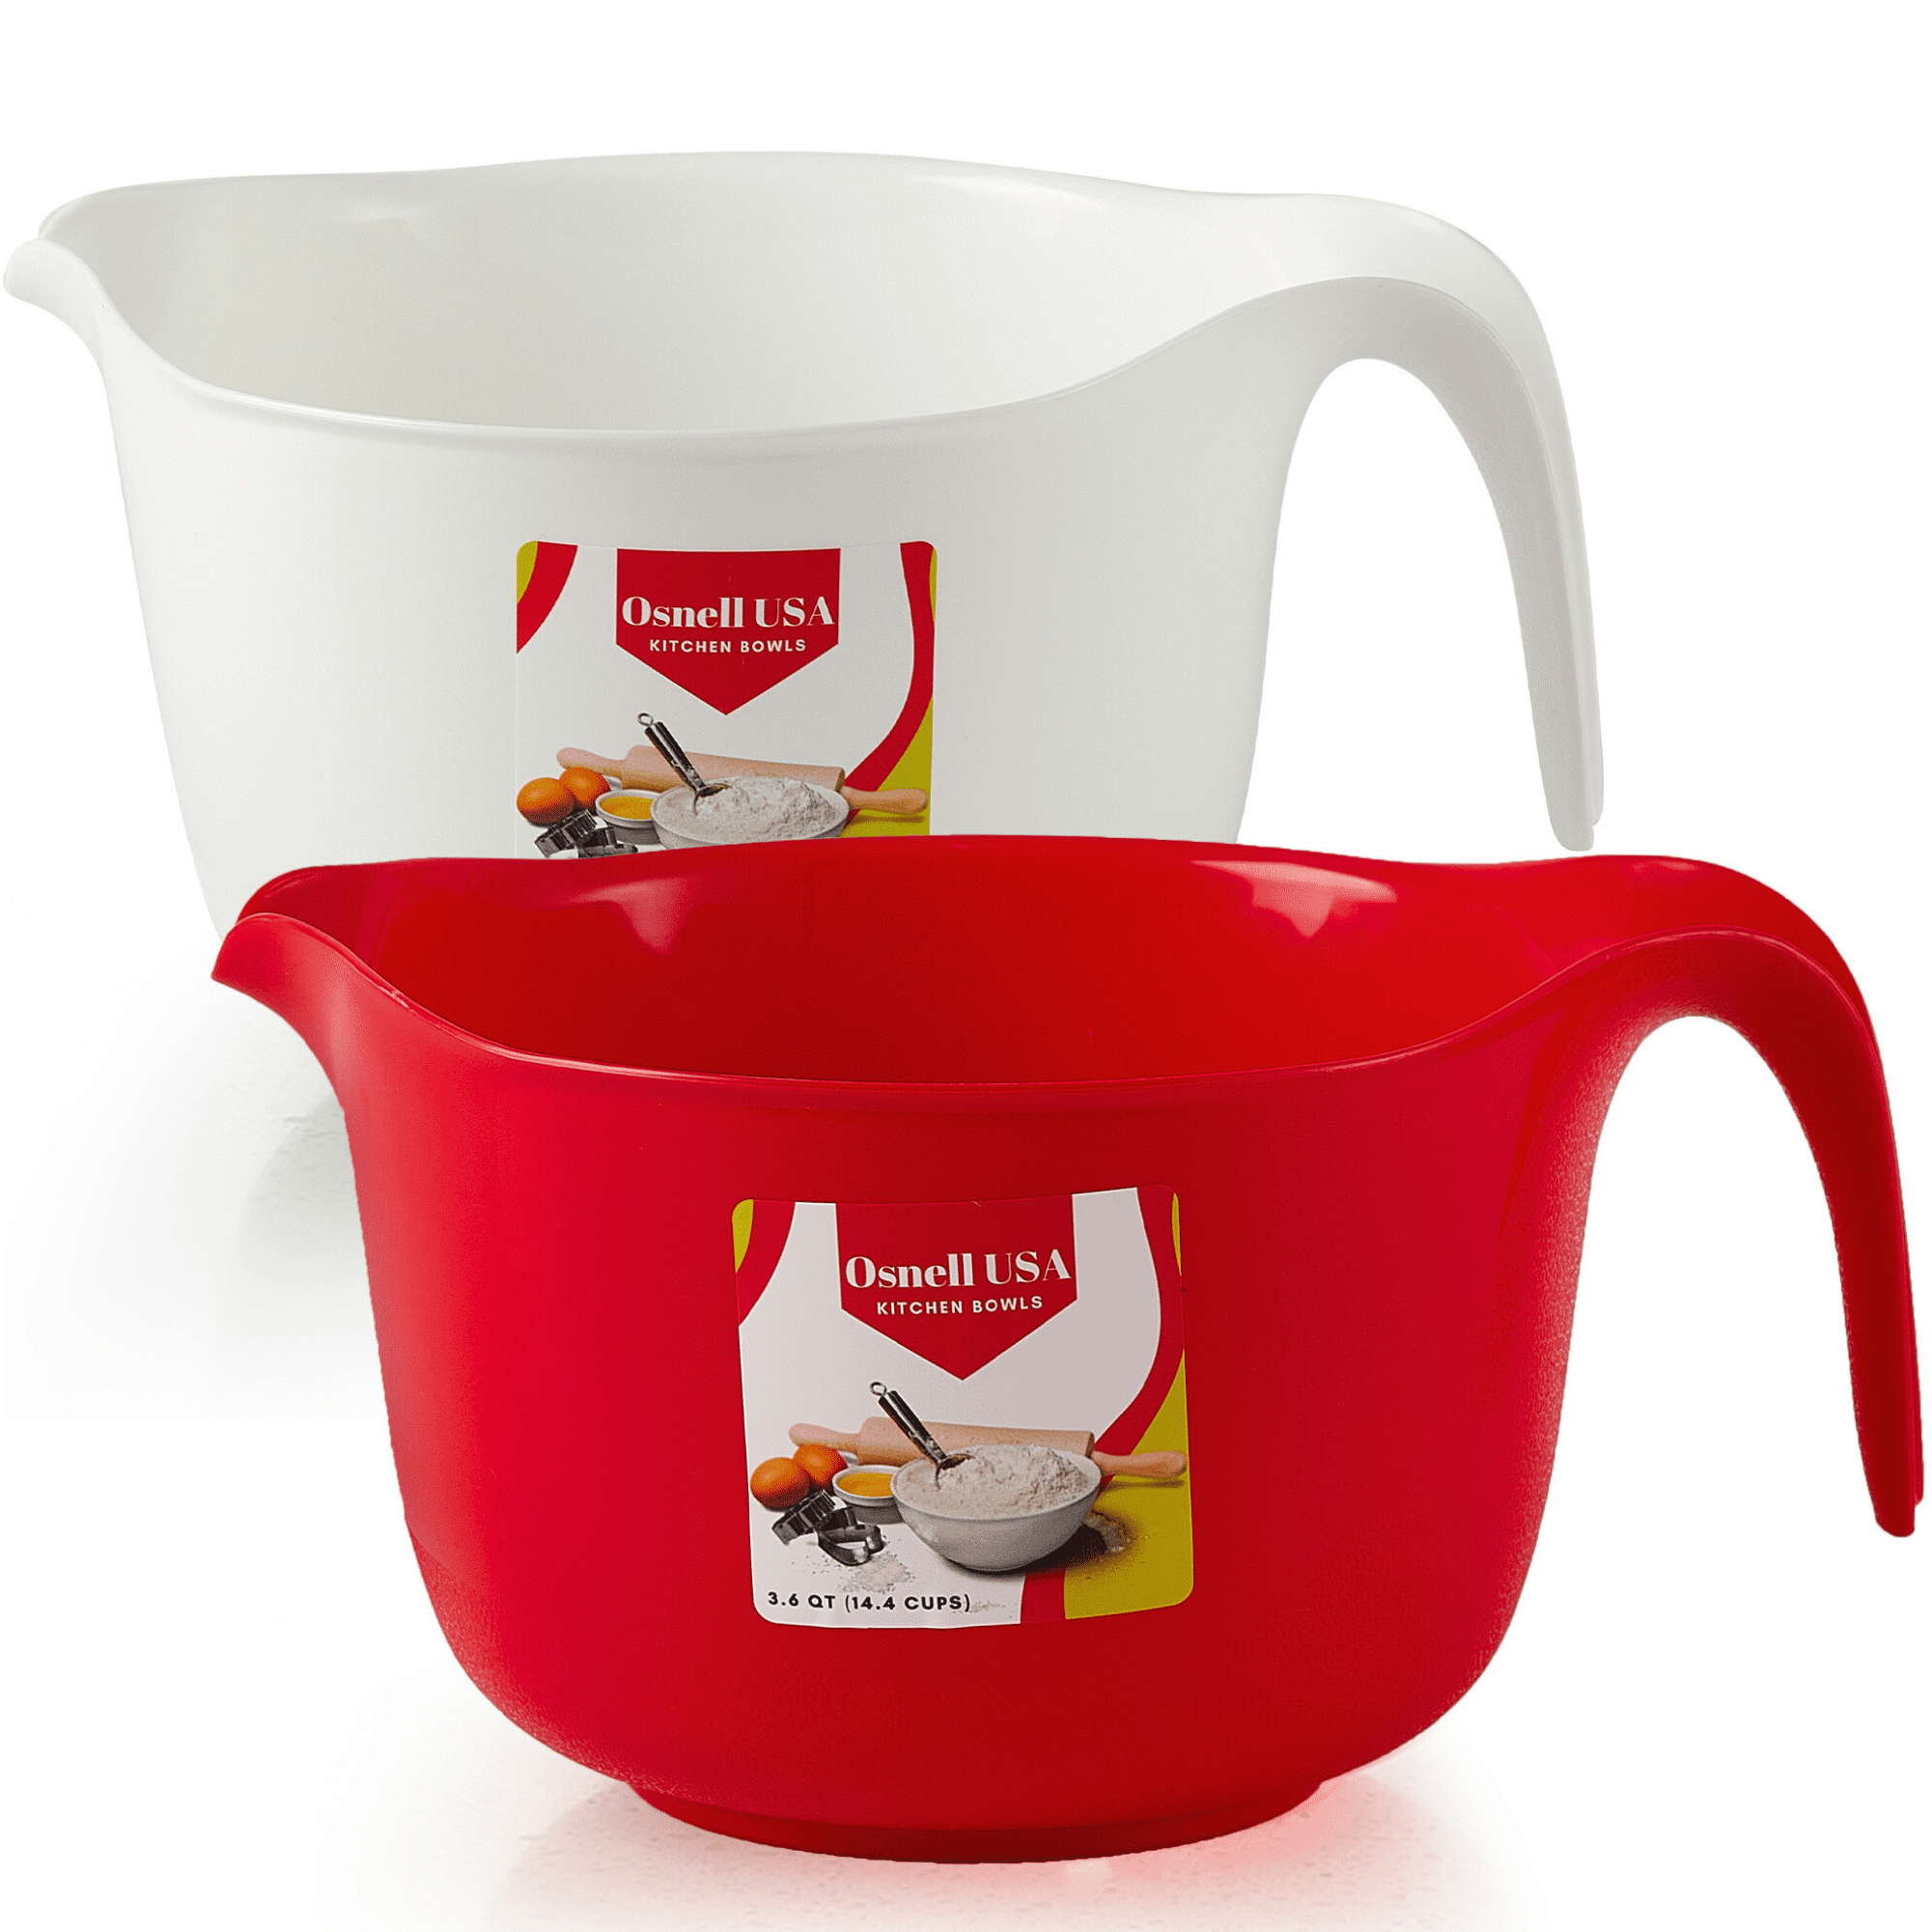 Large Mixing Bowl Set of 2, Plastic Mixing Bowls with Handles & Pour Spout  - Batter Bowl Set Red & White